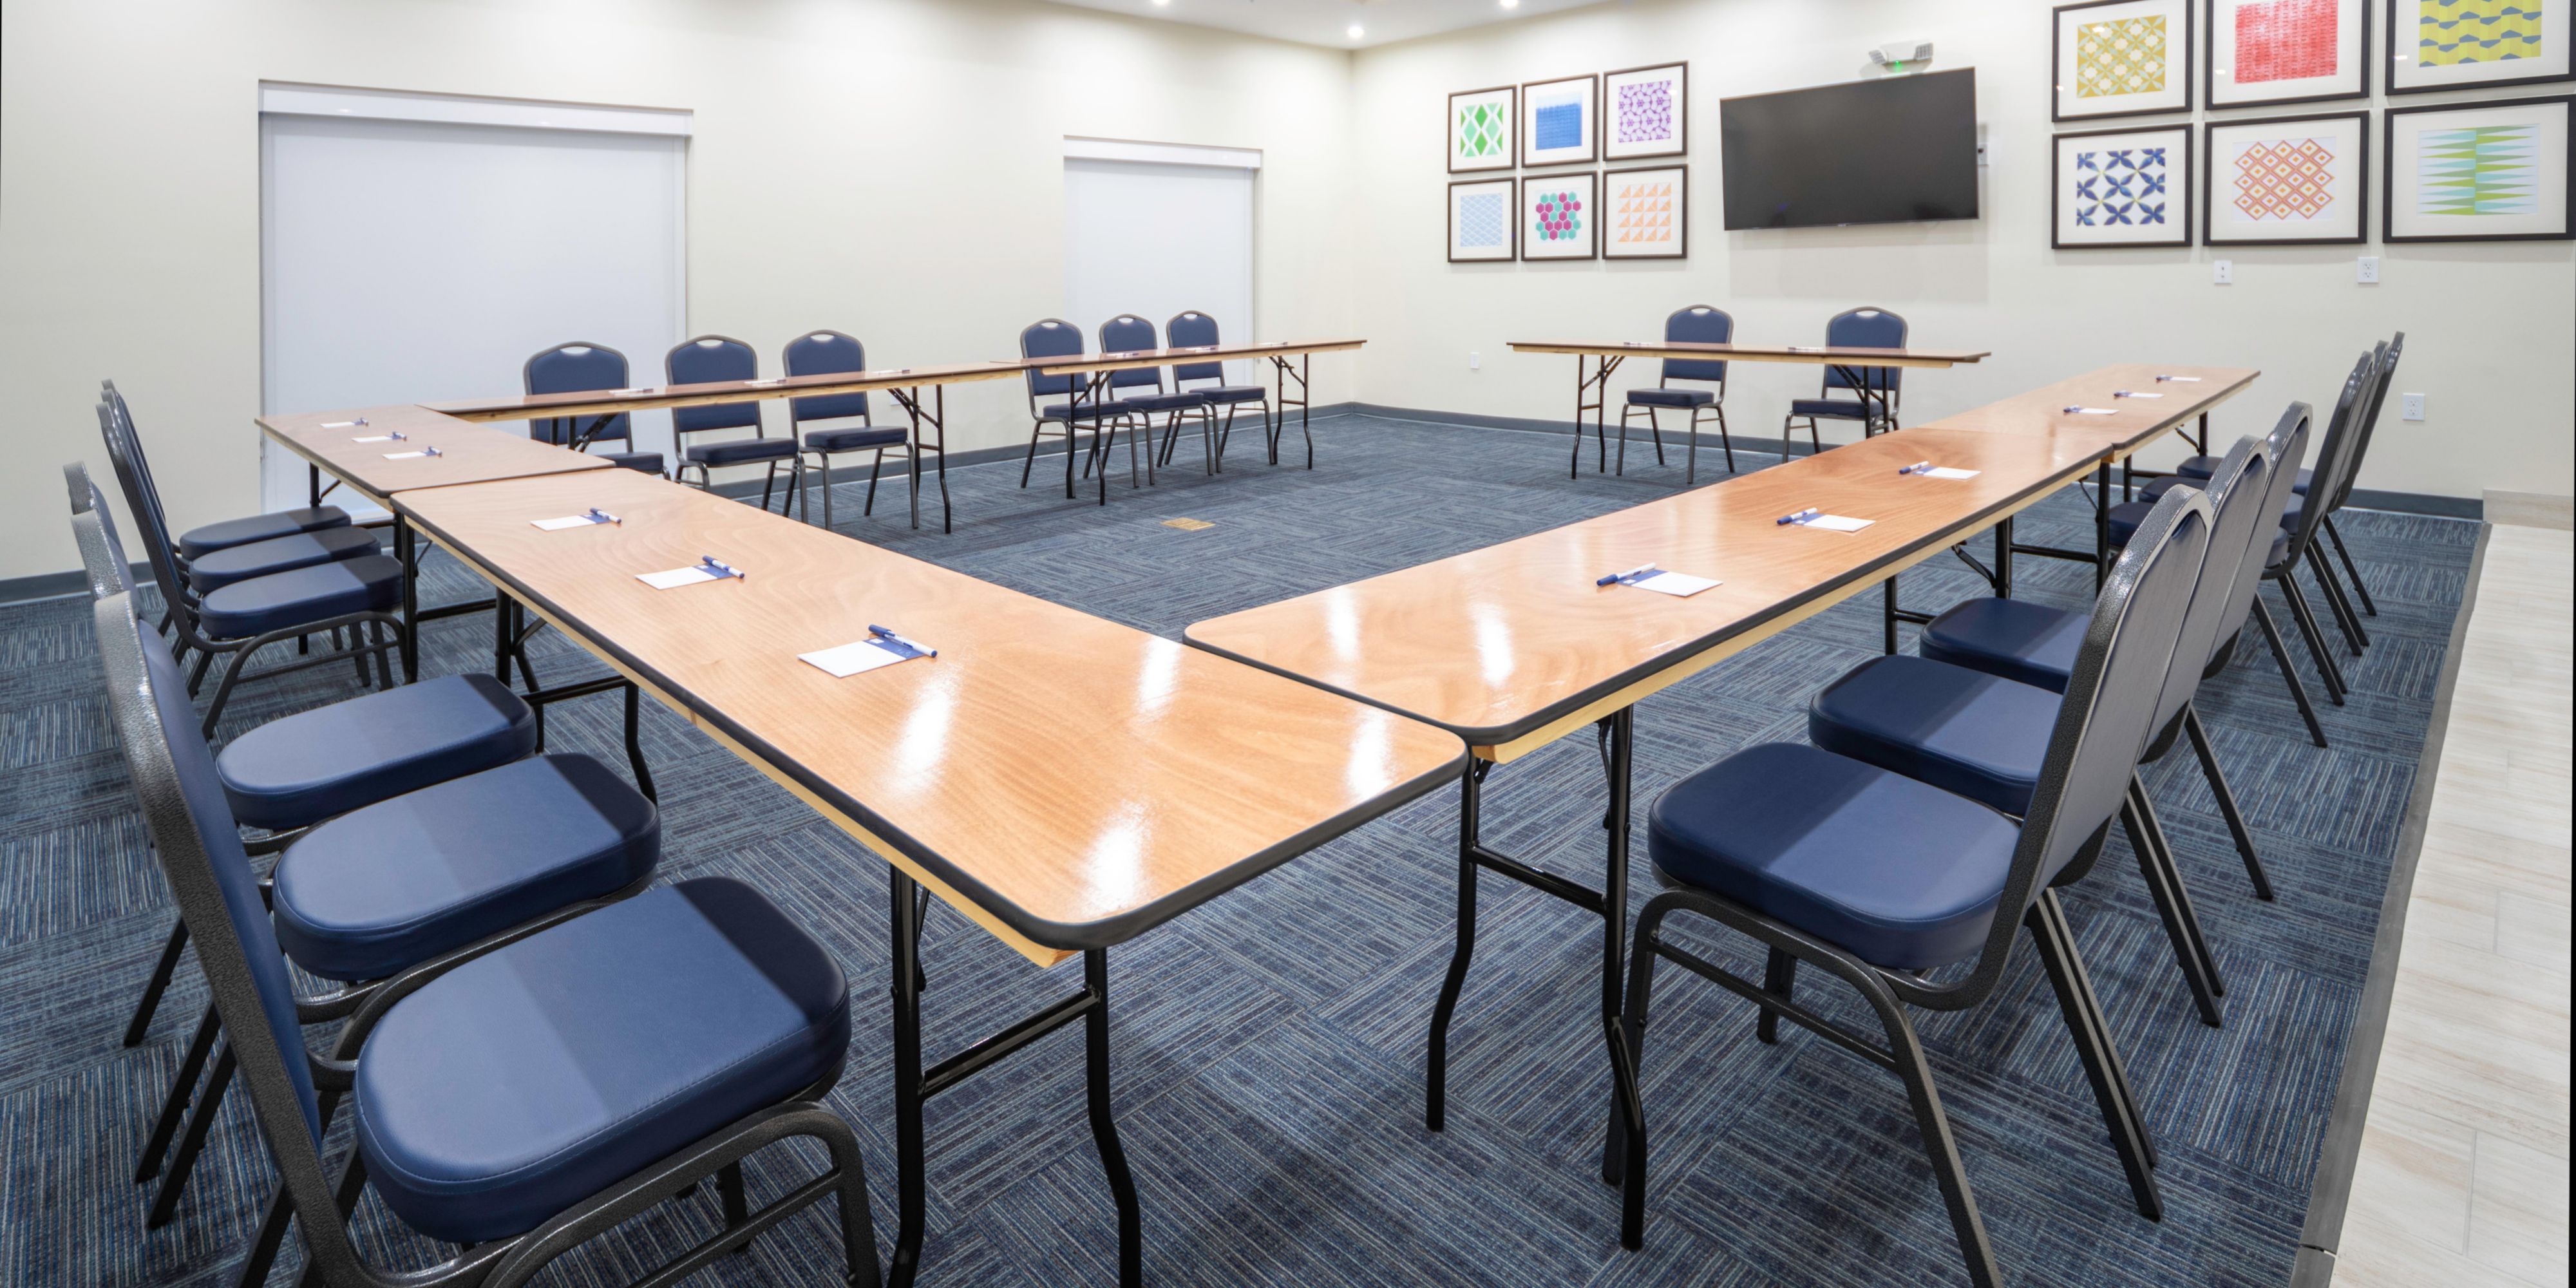 We are delighted to offer a variety of options for your next meeting or event.  Our comfortable guest suites and functional meeting room will provide an ideal setting for a wide range of events.  